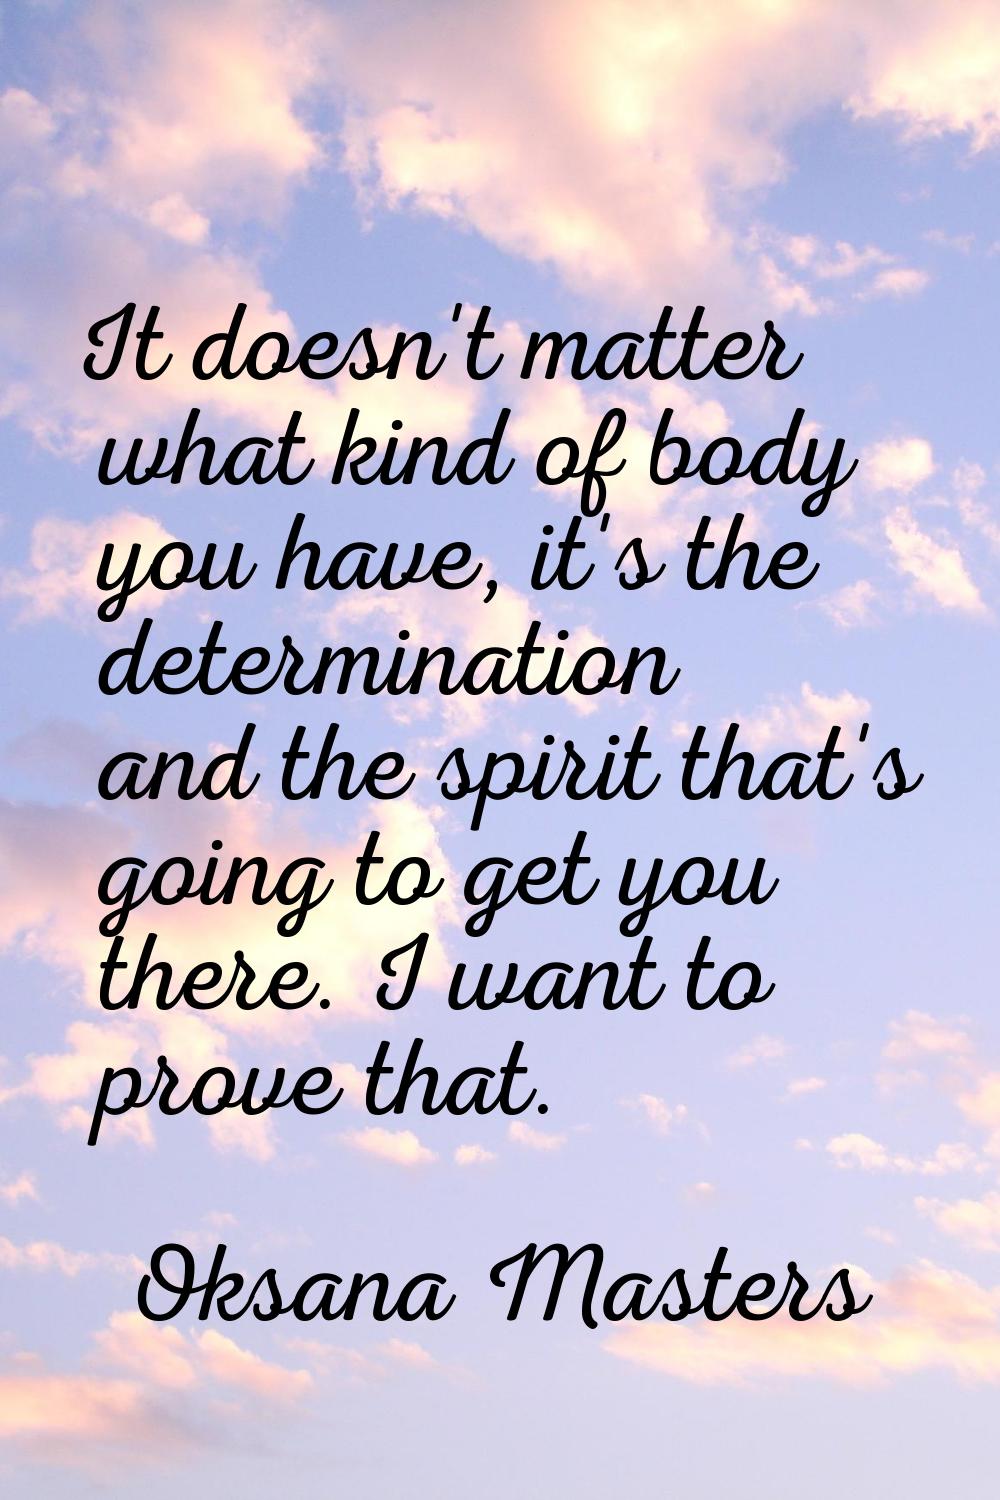 It doesn't matter what kind of body you have, it's the determination and the spirit that's going to